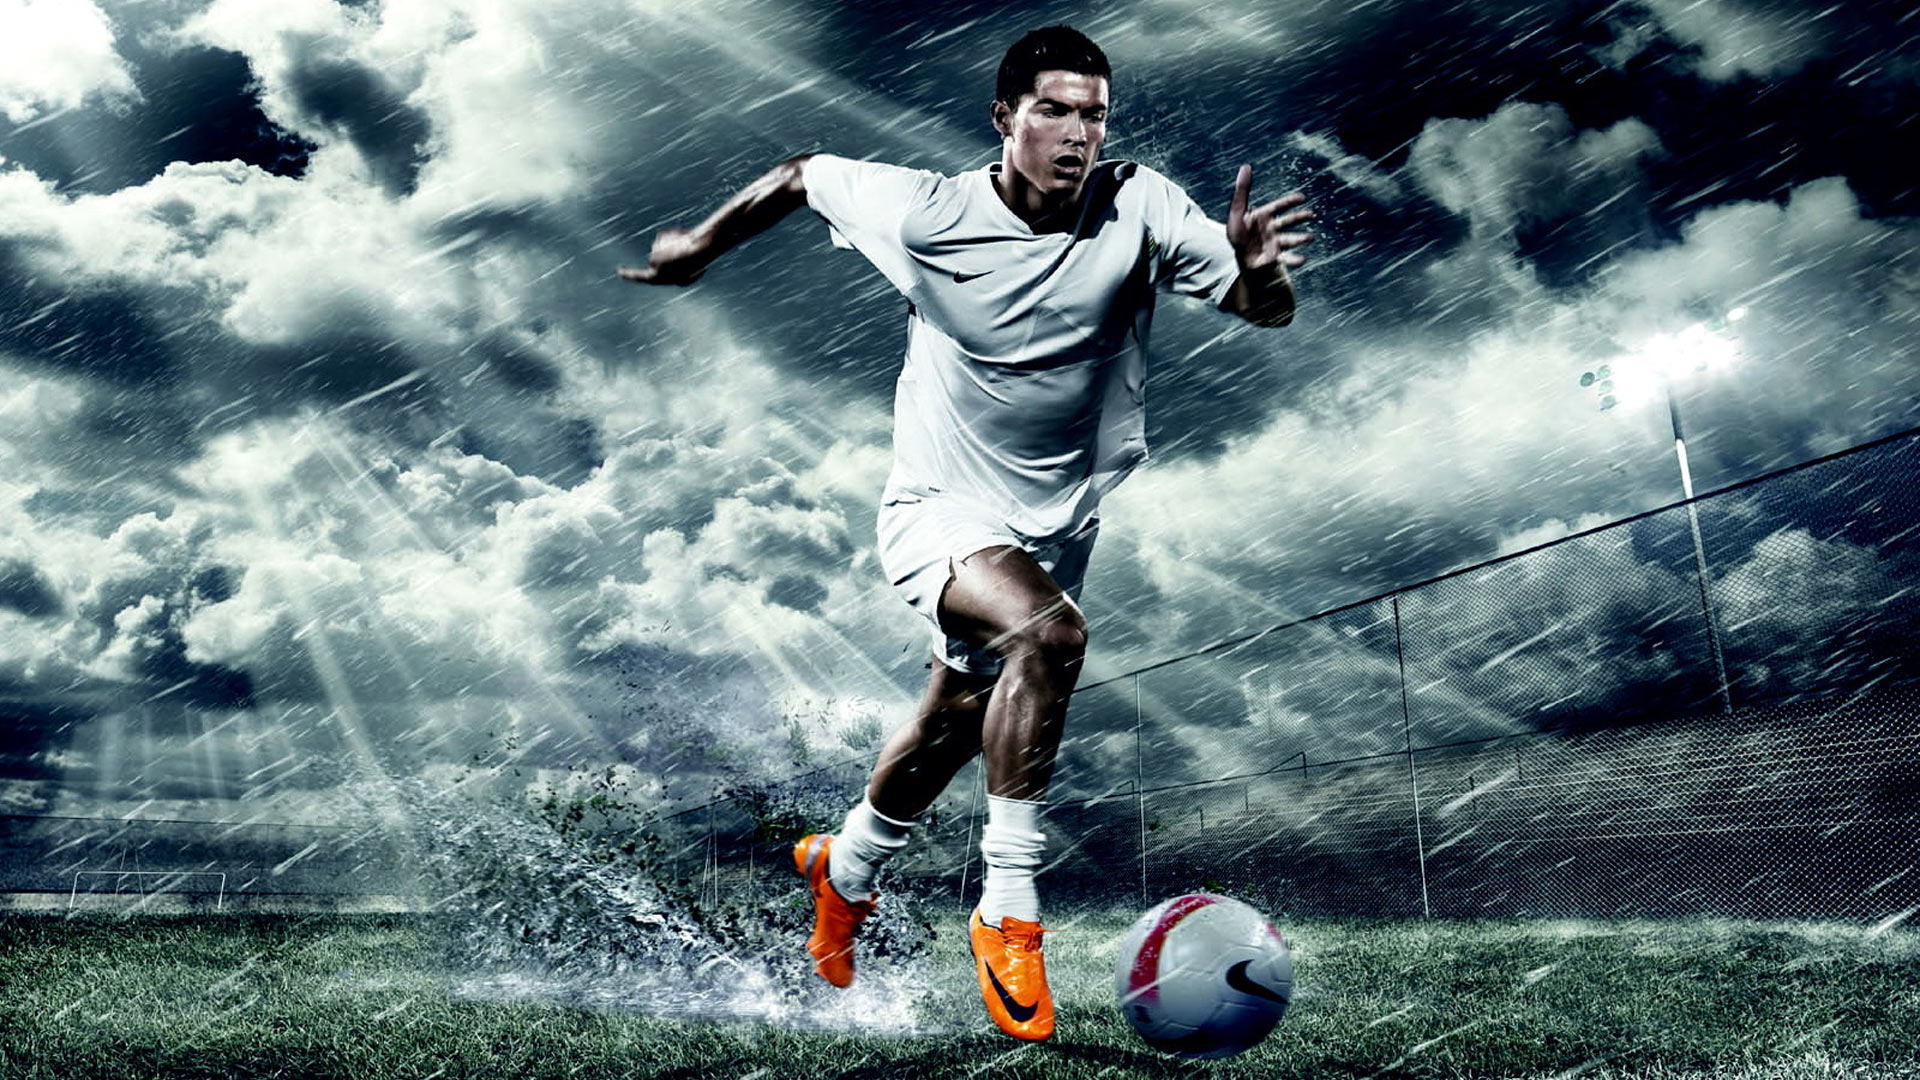 cr7 hd wallpapers 1080p,football player,soccer player,football,soccer,soccer ball